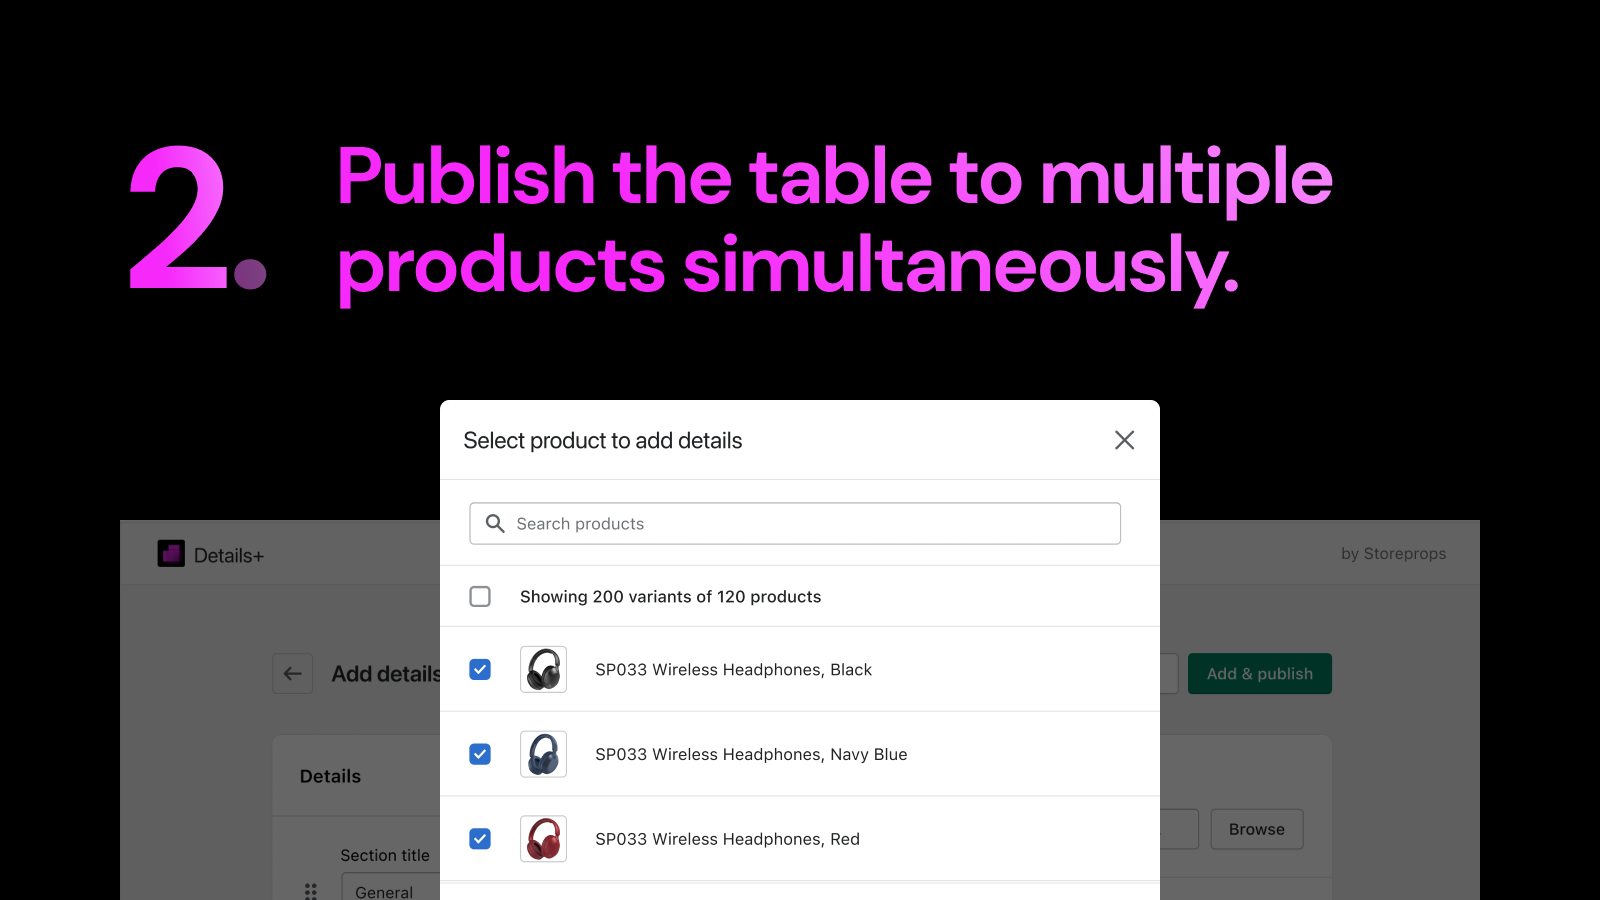 Publish the table to multiple products simultaneously.